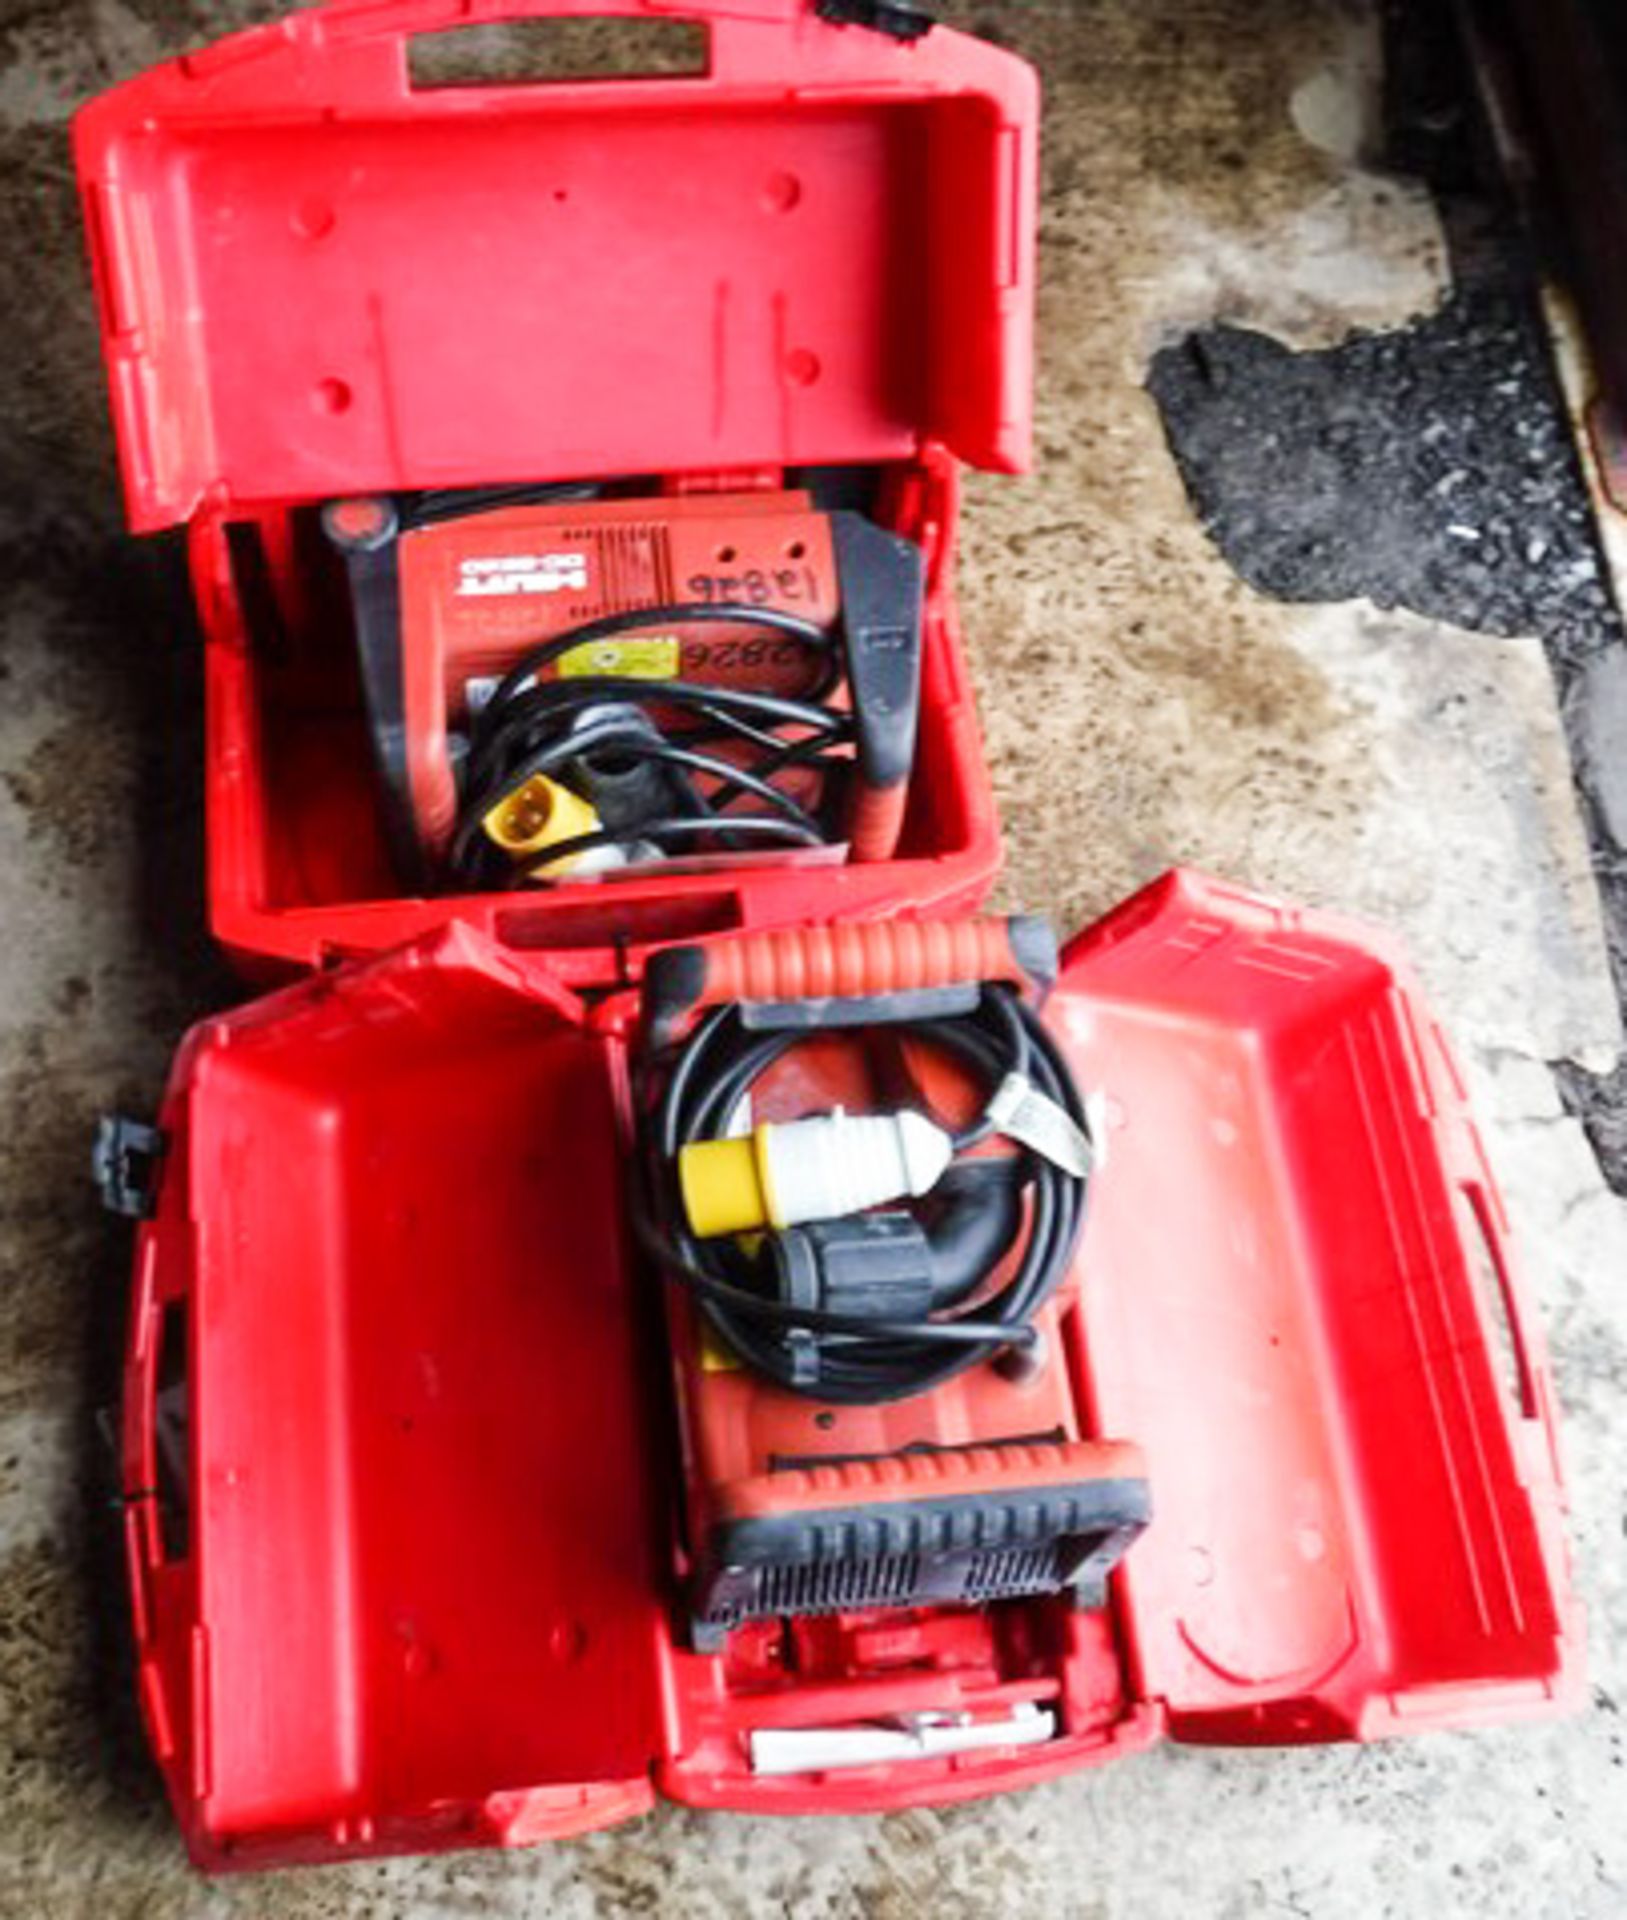 2 X HILTI WALL CHARGERS